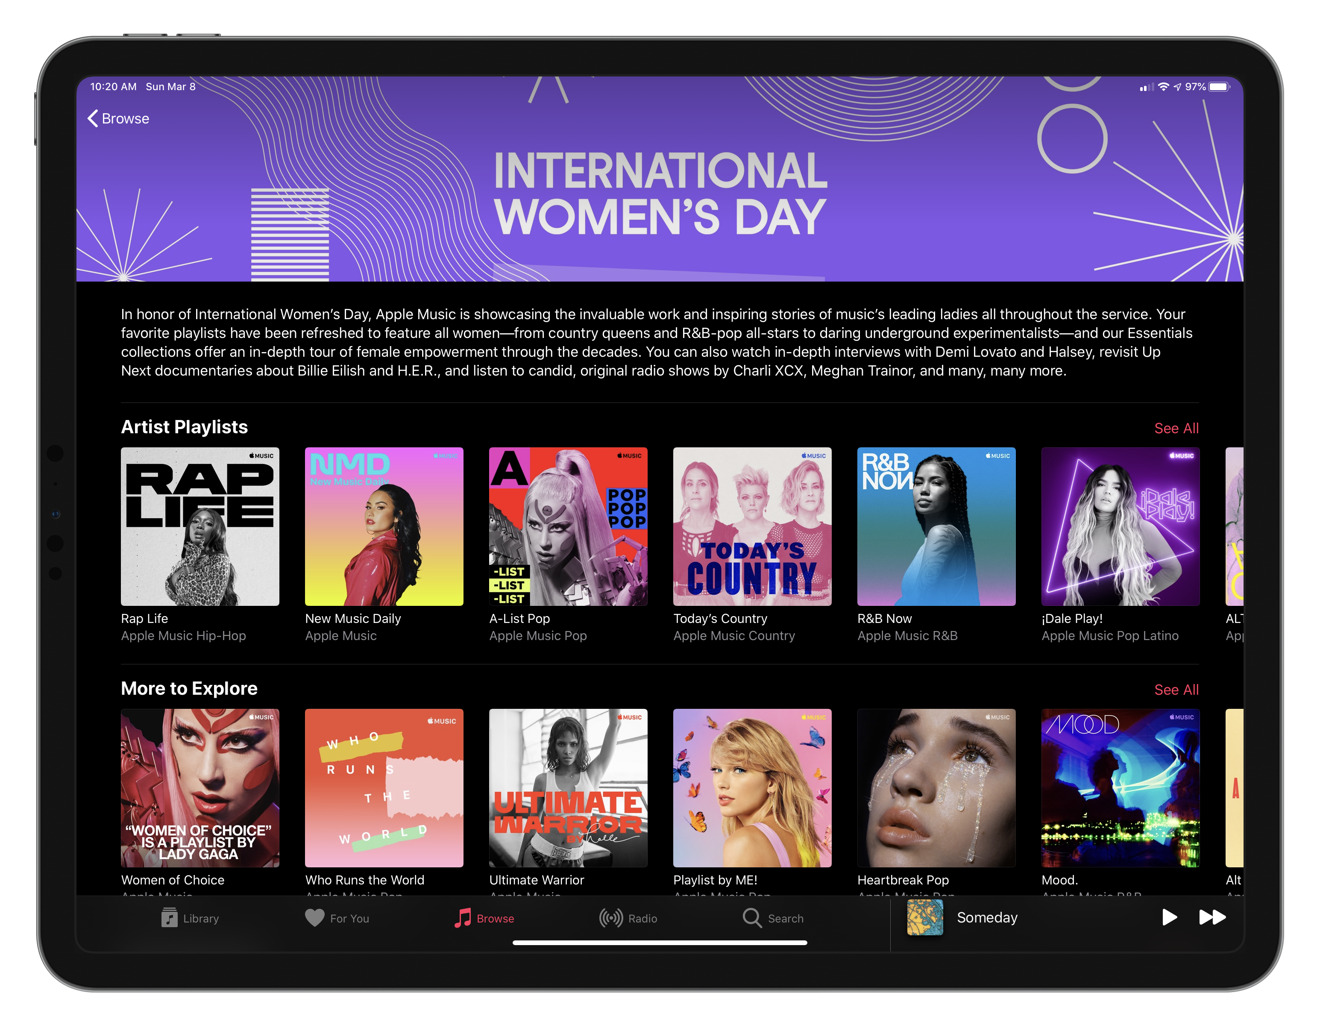 Apple Celebrating International Women’s Day and Women’s History Month with App Store and Apple TV app and more